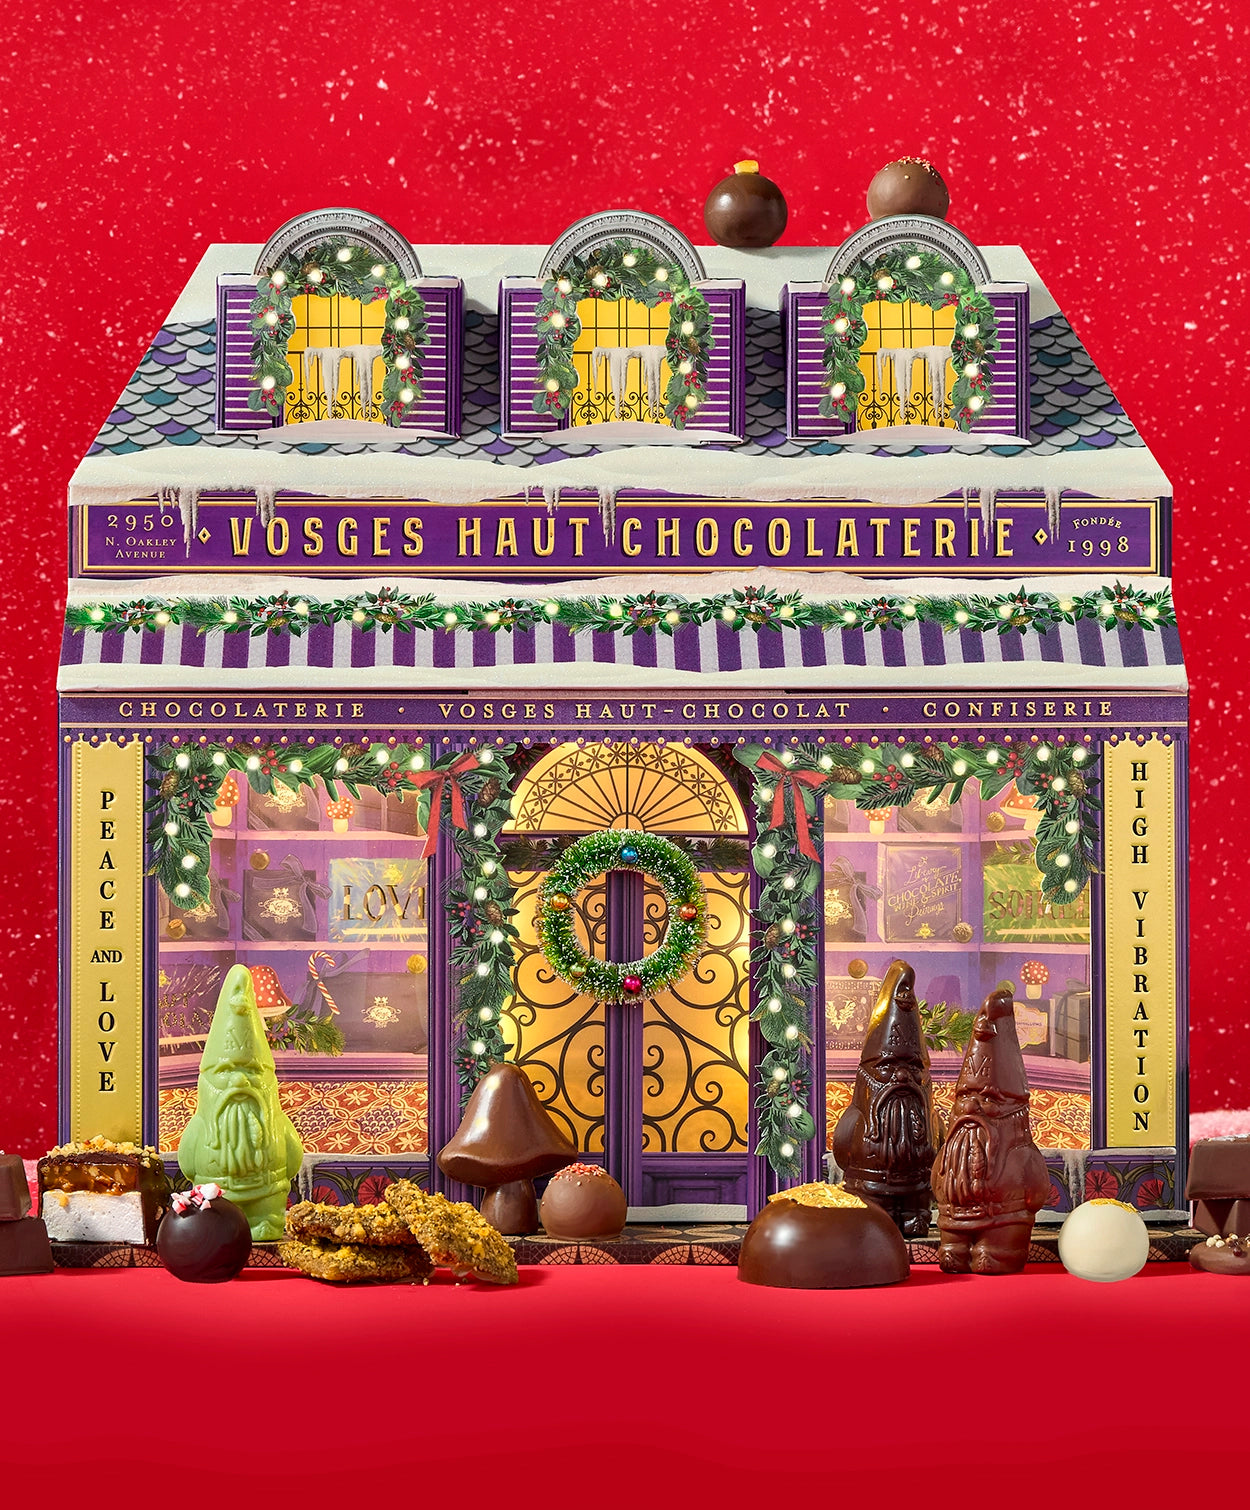 A Chocolate Advent calendar resembling a small chocolate shop sits on a red background surround by chocolate confections and lightly falling snow. 